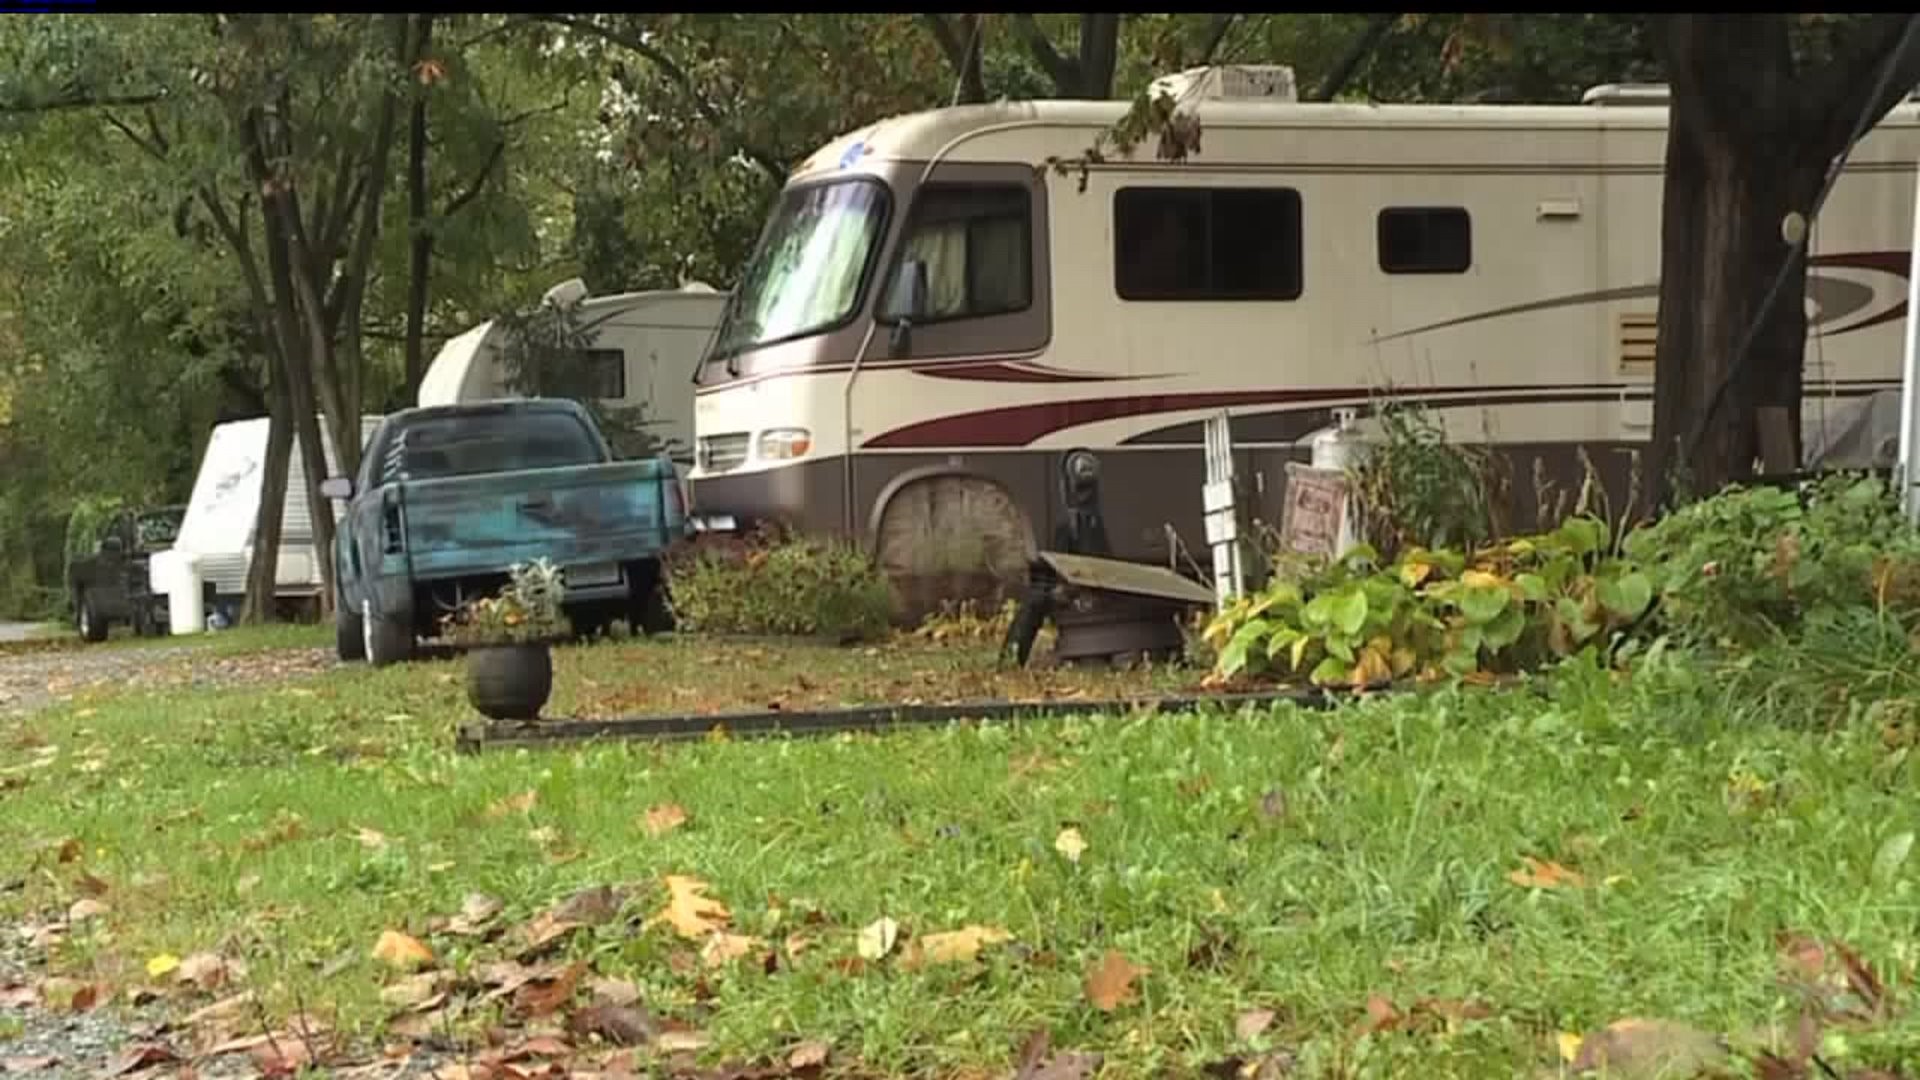 Campers have 45 days to vacate campground in Lancaster Co.